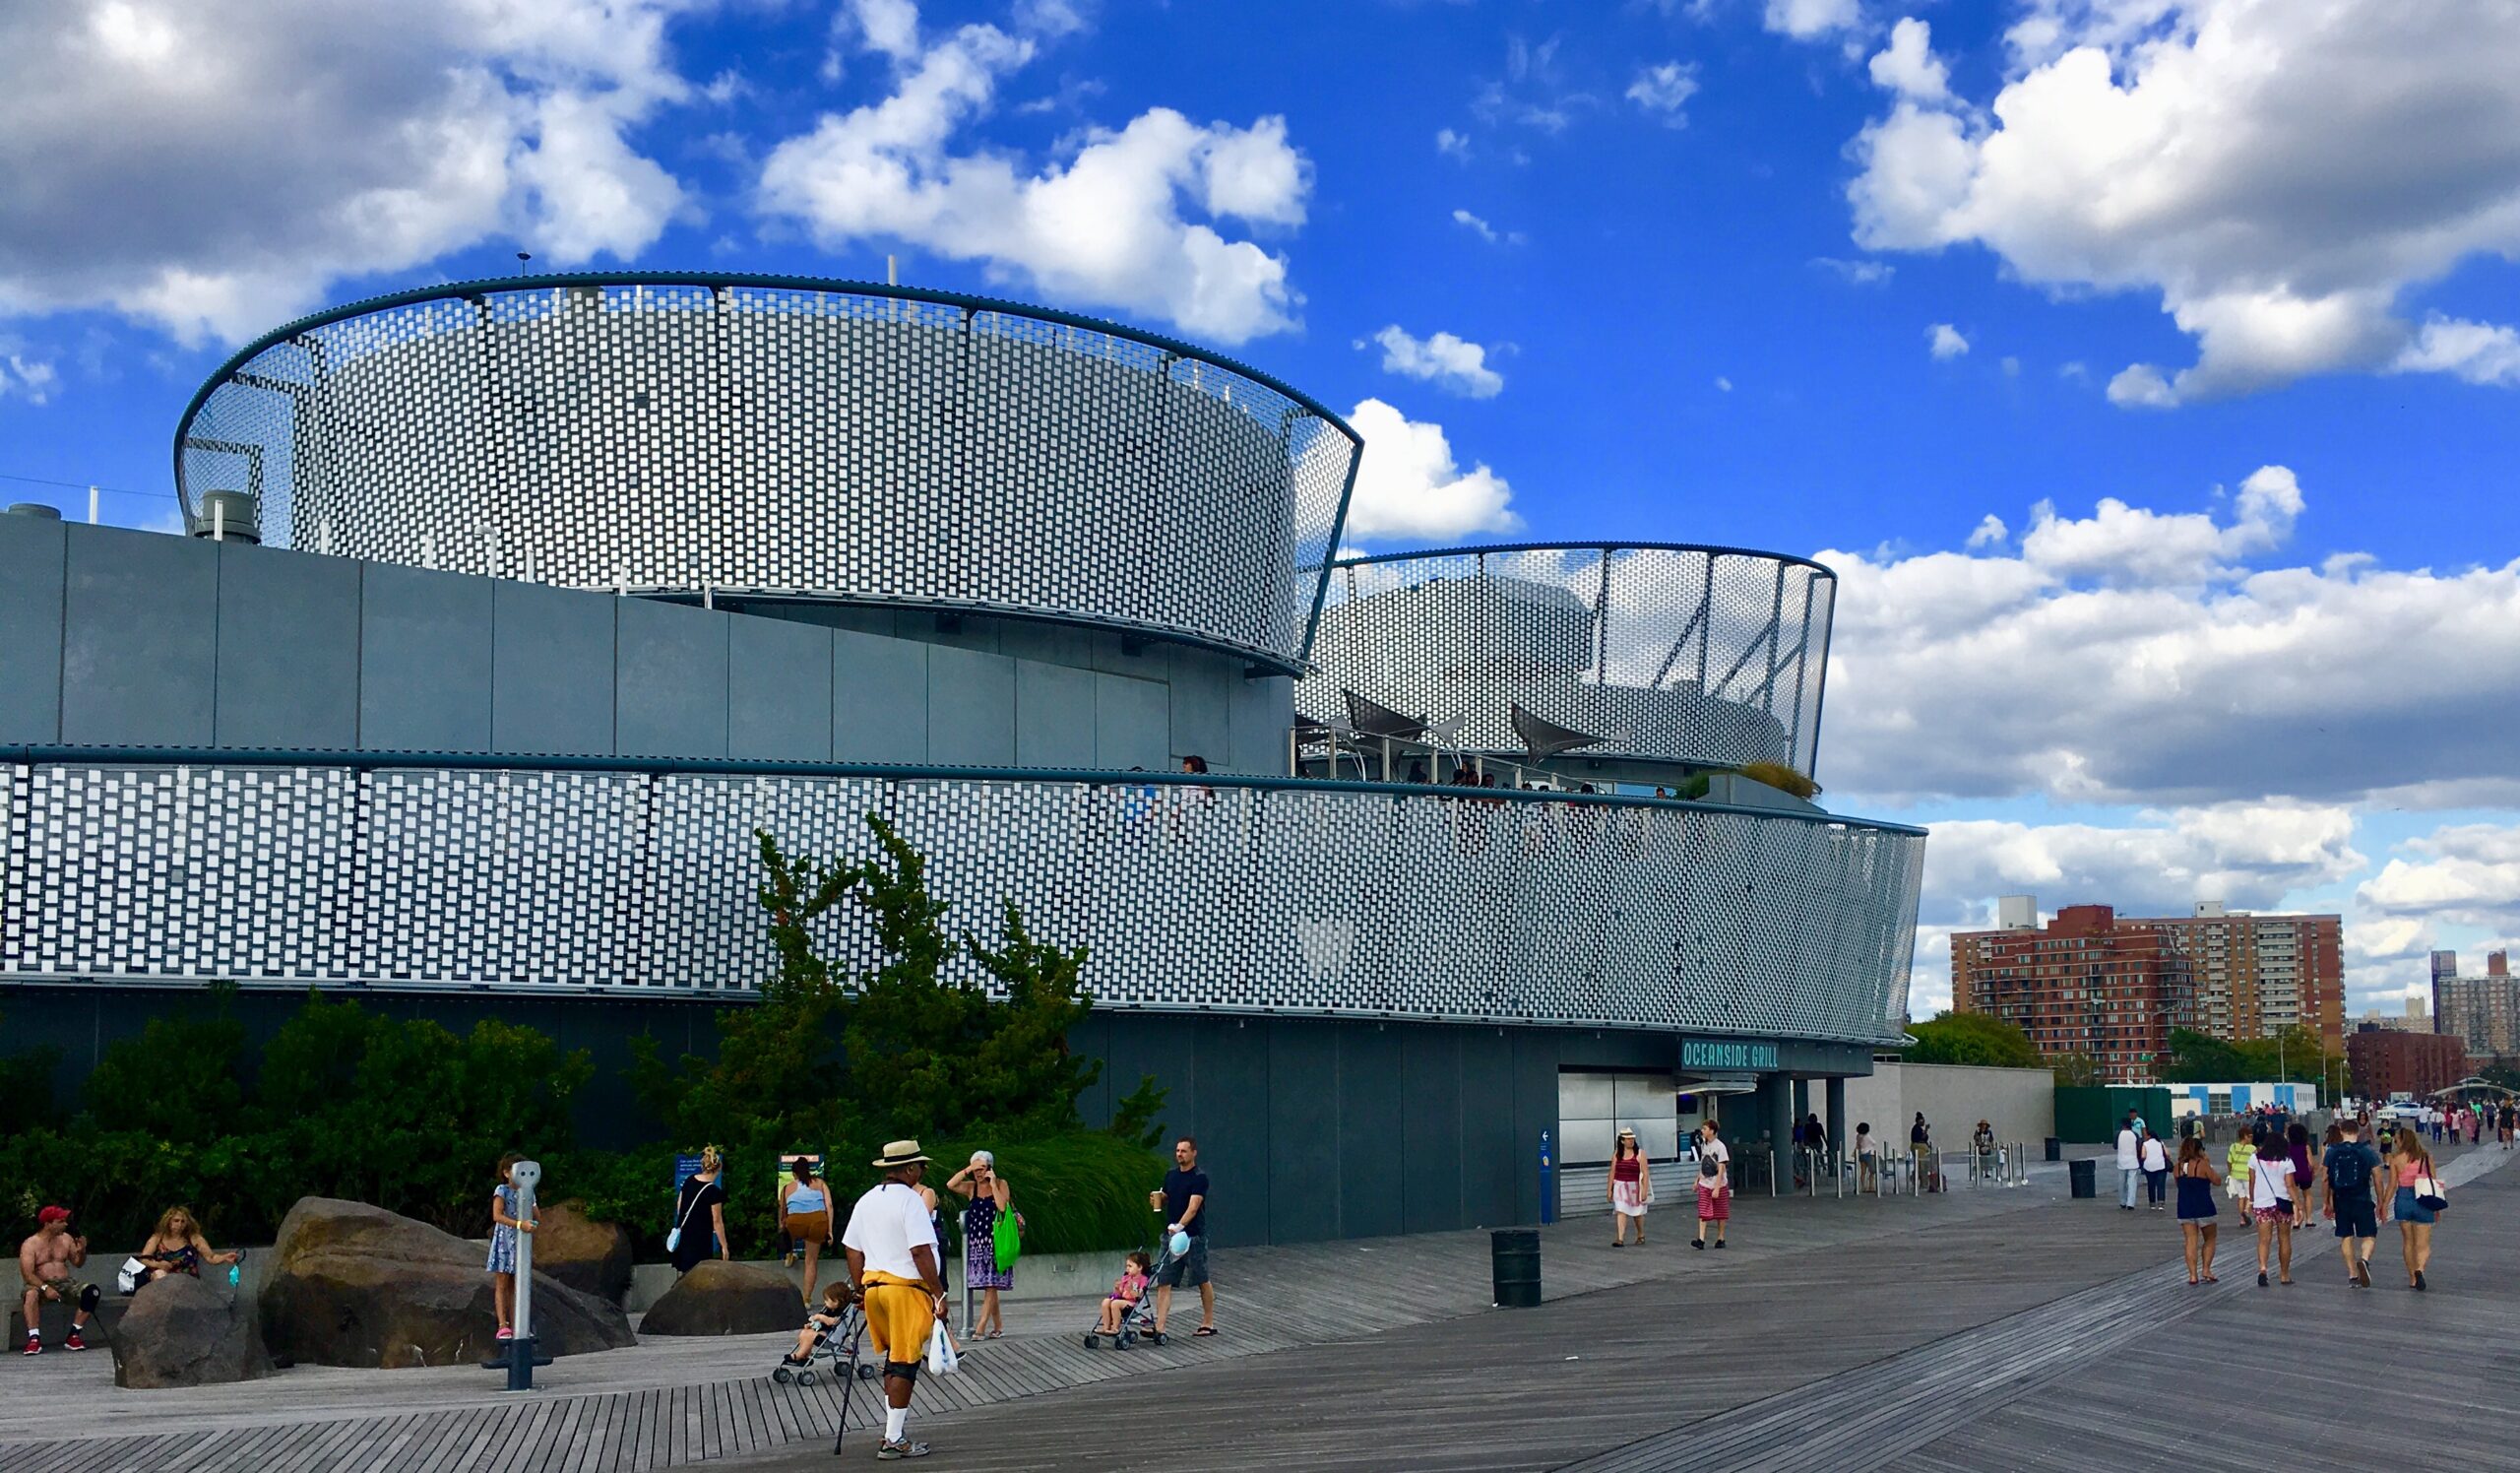 The glittering facade of the New York Aquarium is called a shimmer wall. Eagle photo by Lore Croghan